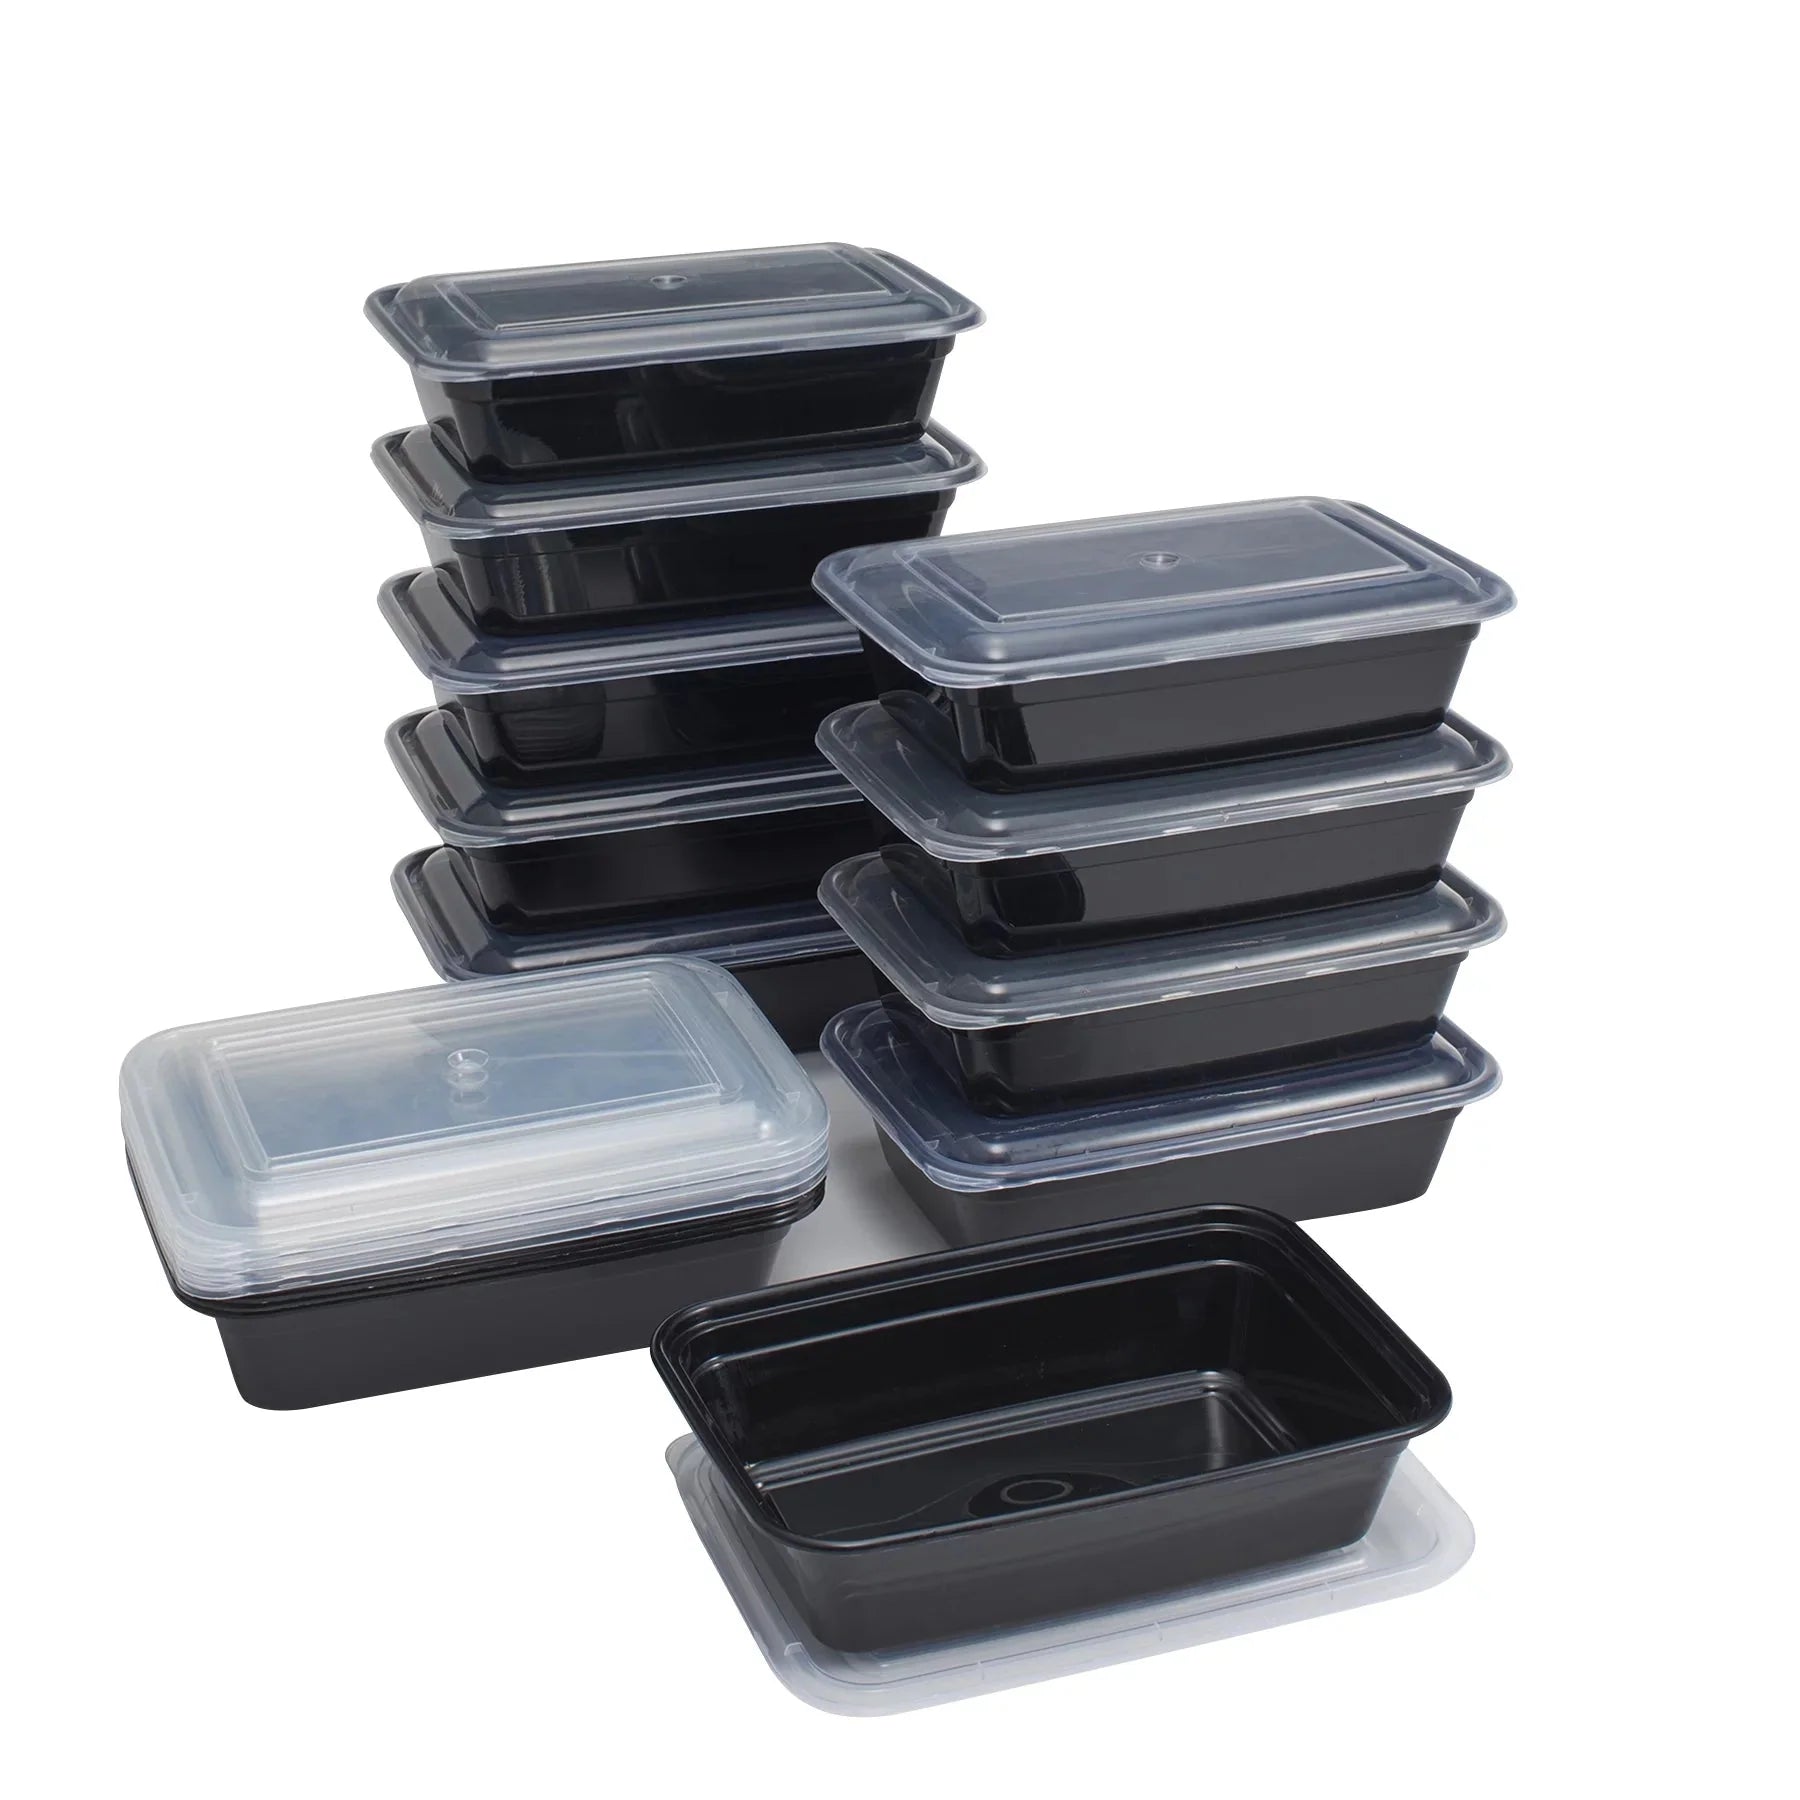 Wholesale prices with free shipping all over United States Mainstays 30-Piece Meal Prep Food Storage Containers - Steven Deals